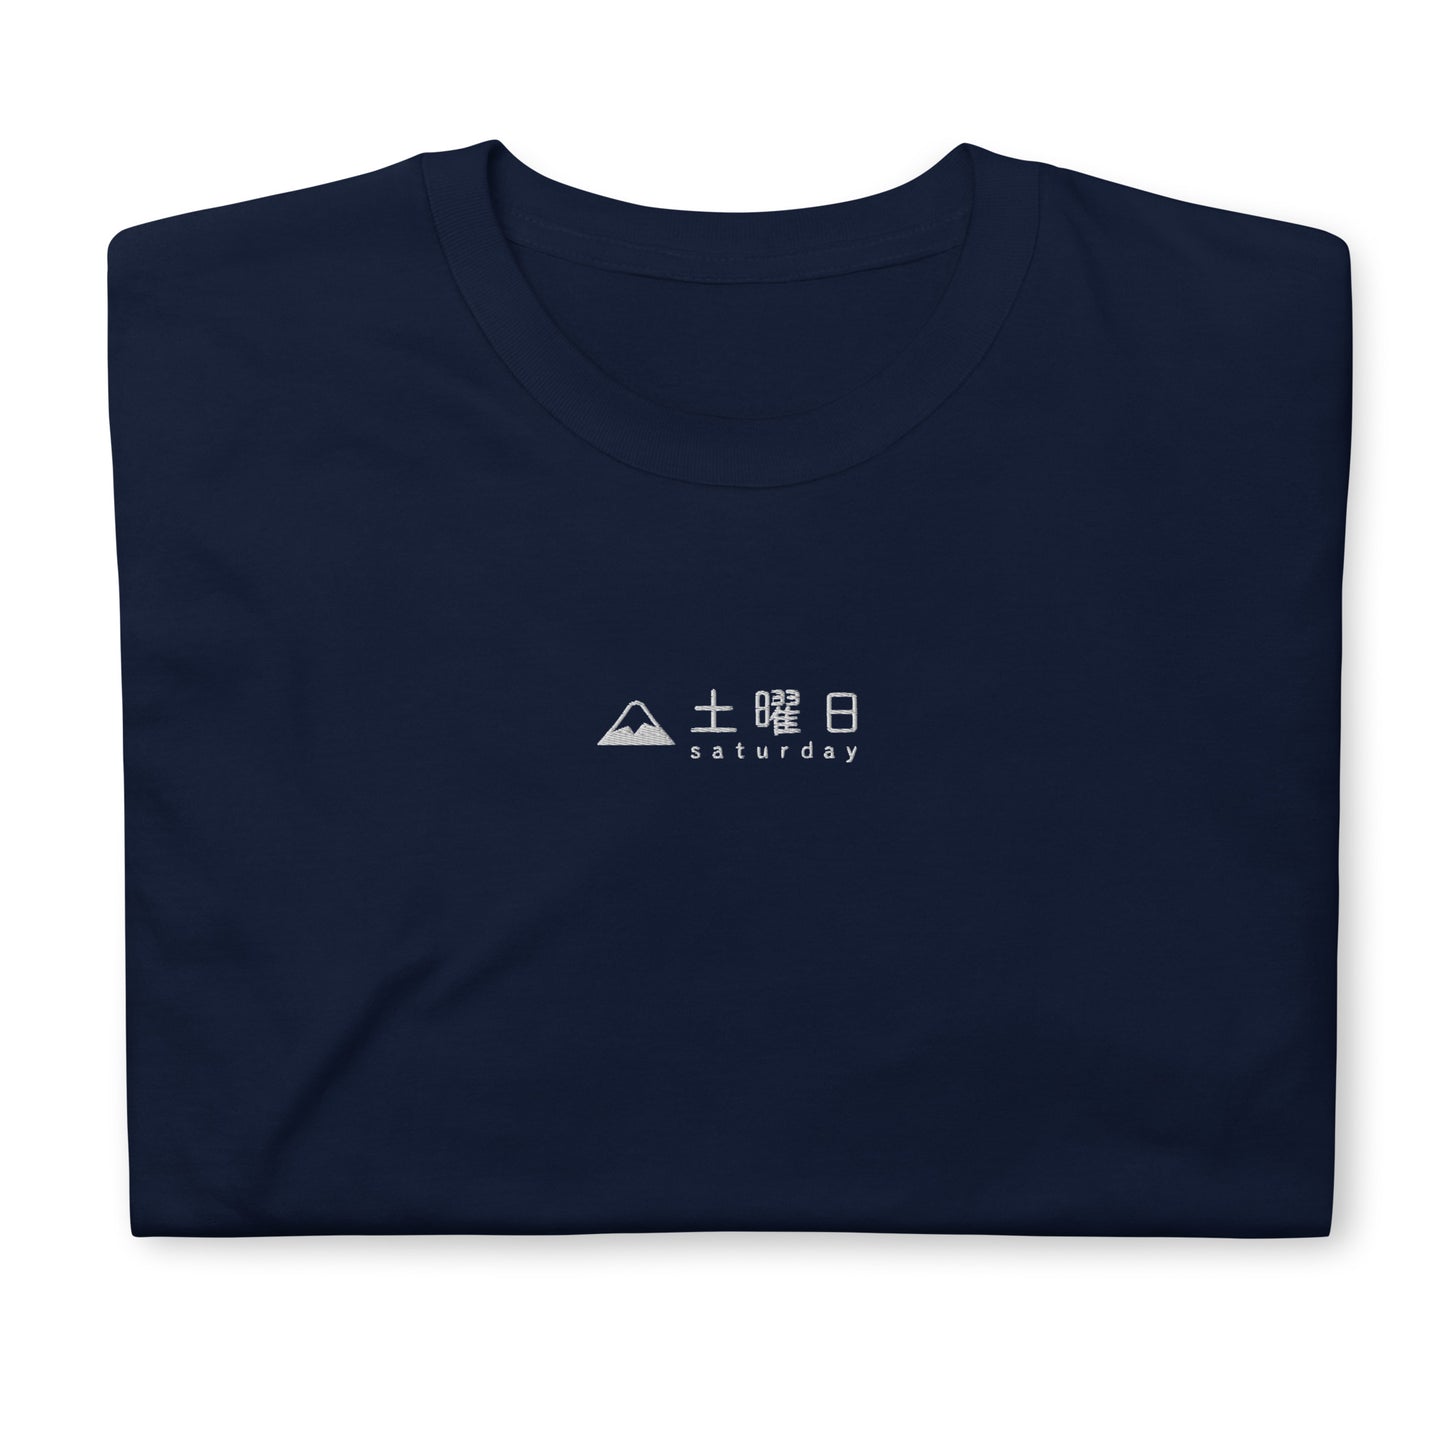 Navy High Quality Tee - Front Design with an Black Embroidery "Saturday" in Japanese and English